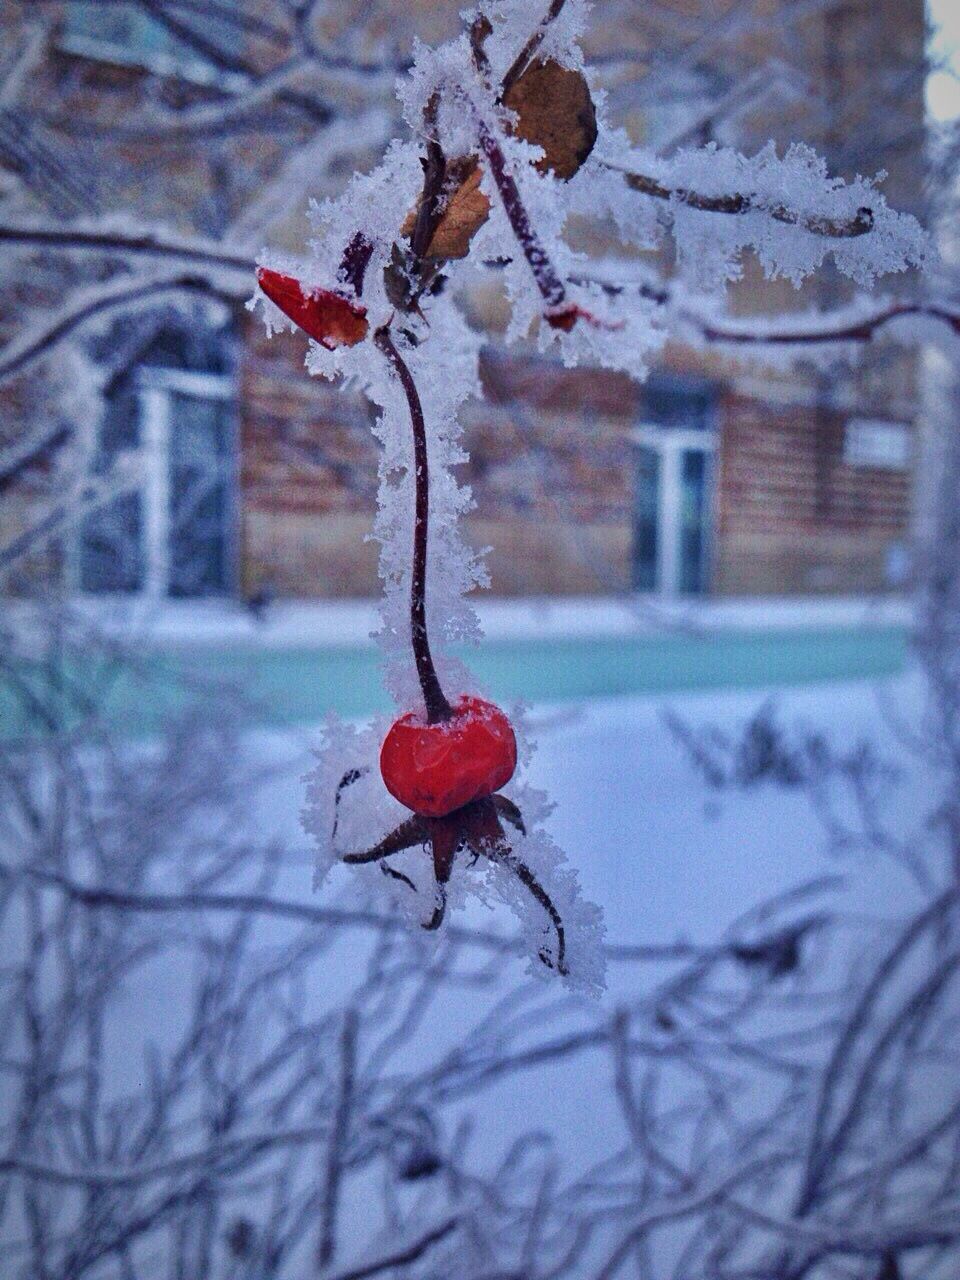 red, snow, winter, cold temperature, close-up, no people, frozen, nature, rose hip, outdoors, day, beauty in nature, freshness